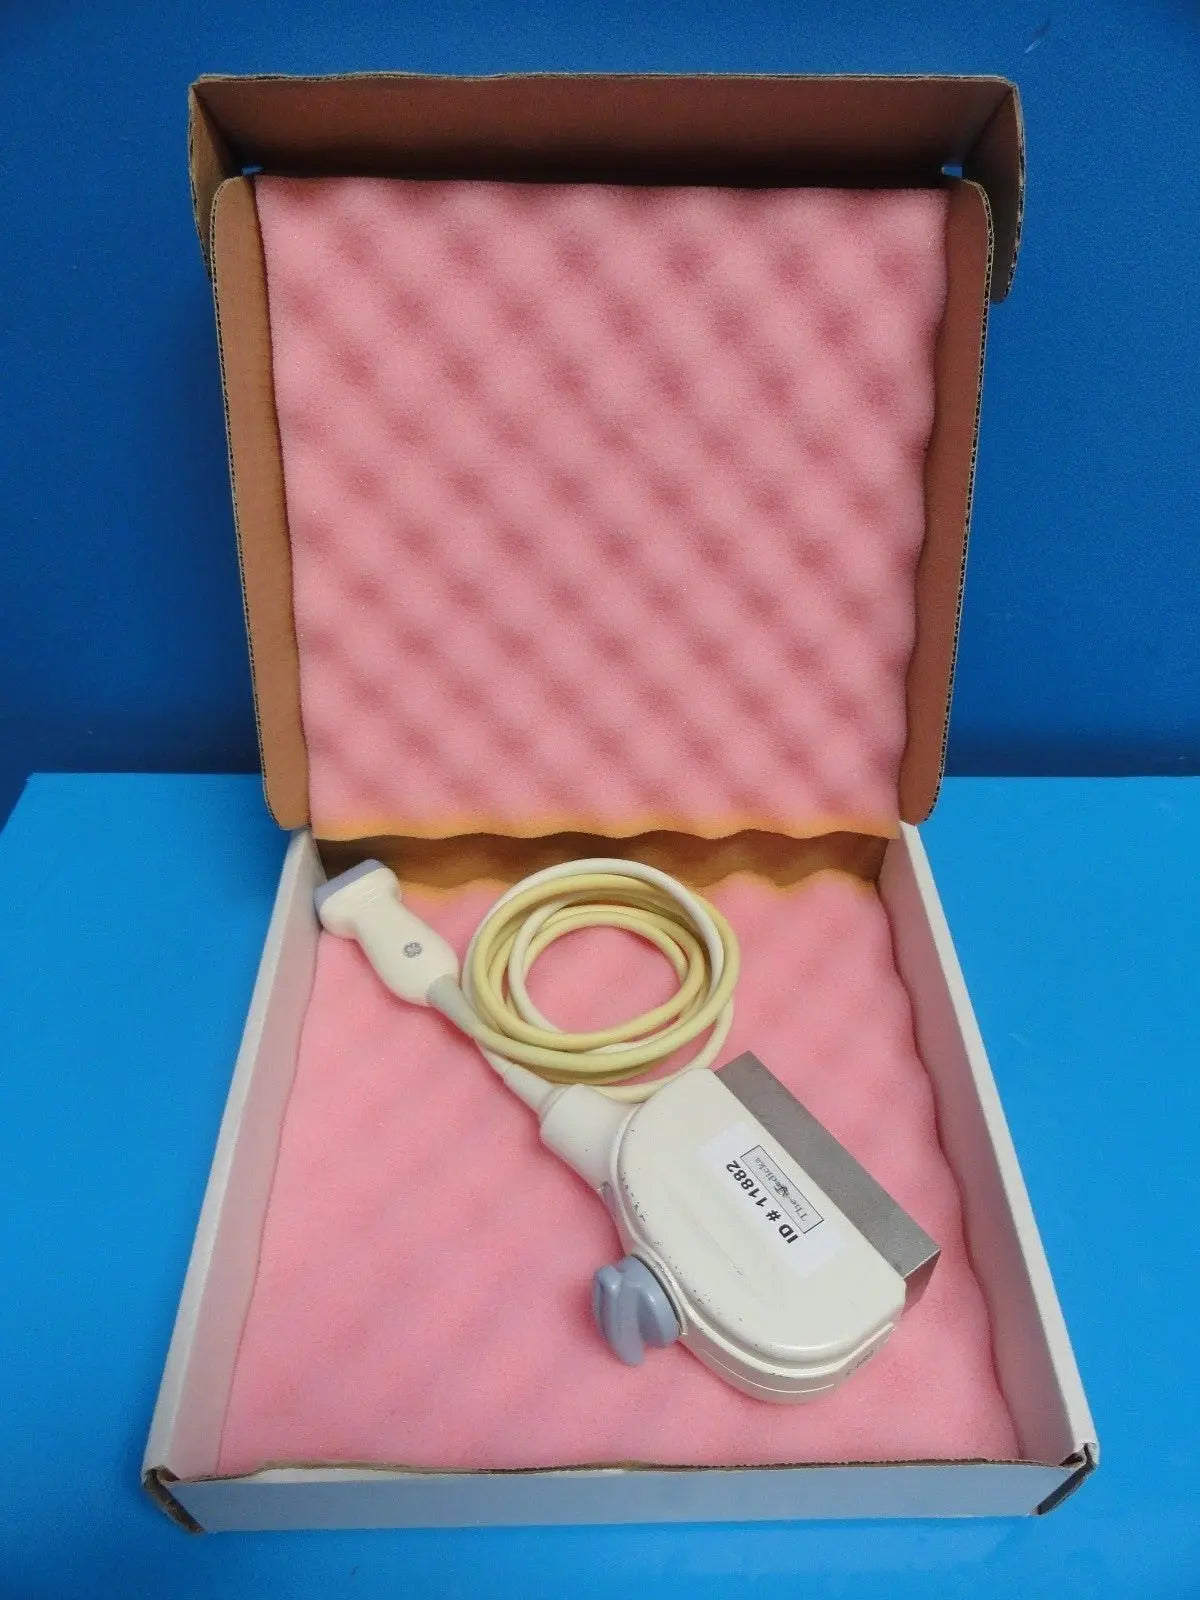 2010 GE S1-5 Ref 5269878 Sector Array Ultrasound Transducer Probe  (11882) DIAGNOSTIC ULTRASOUND MACHINES FOR SALE